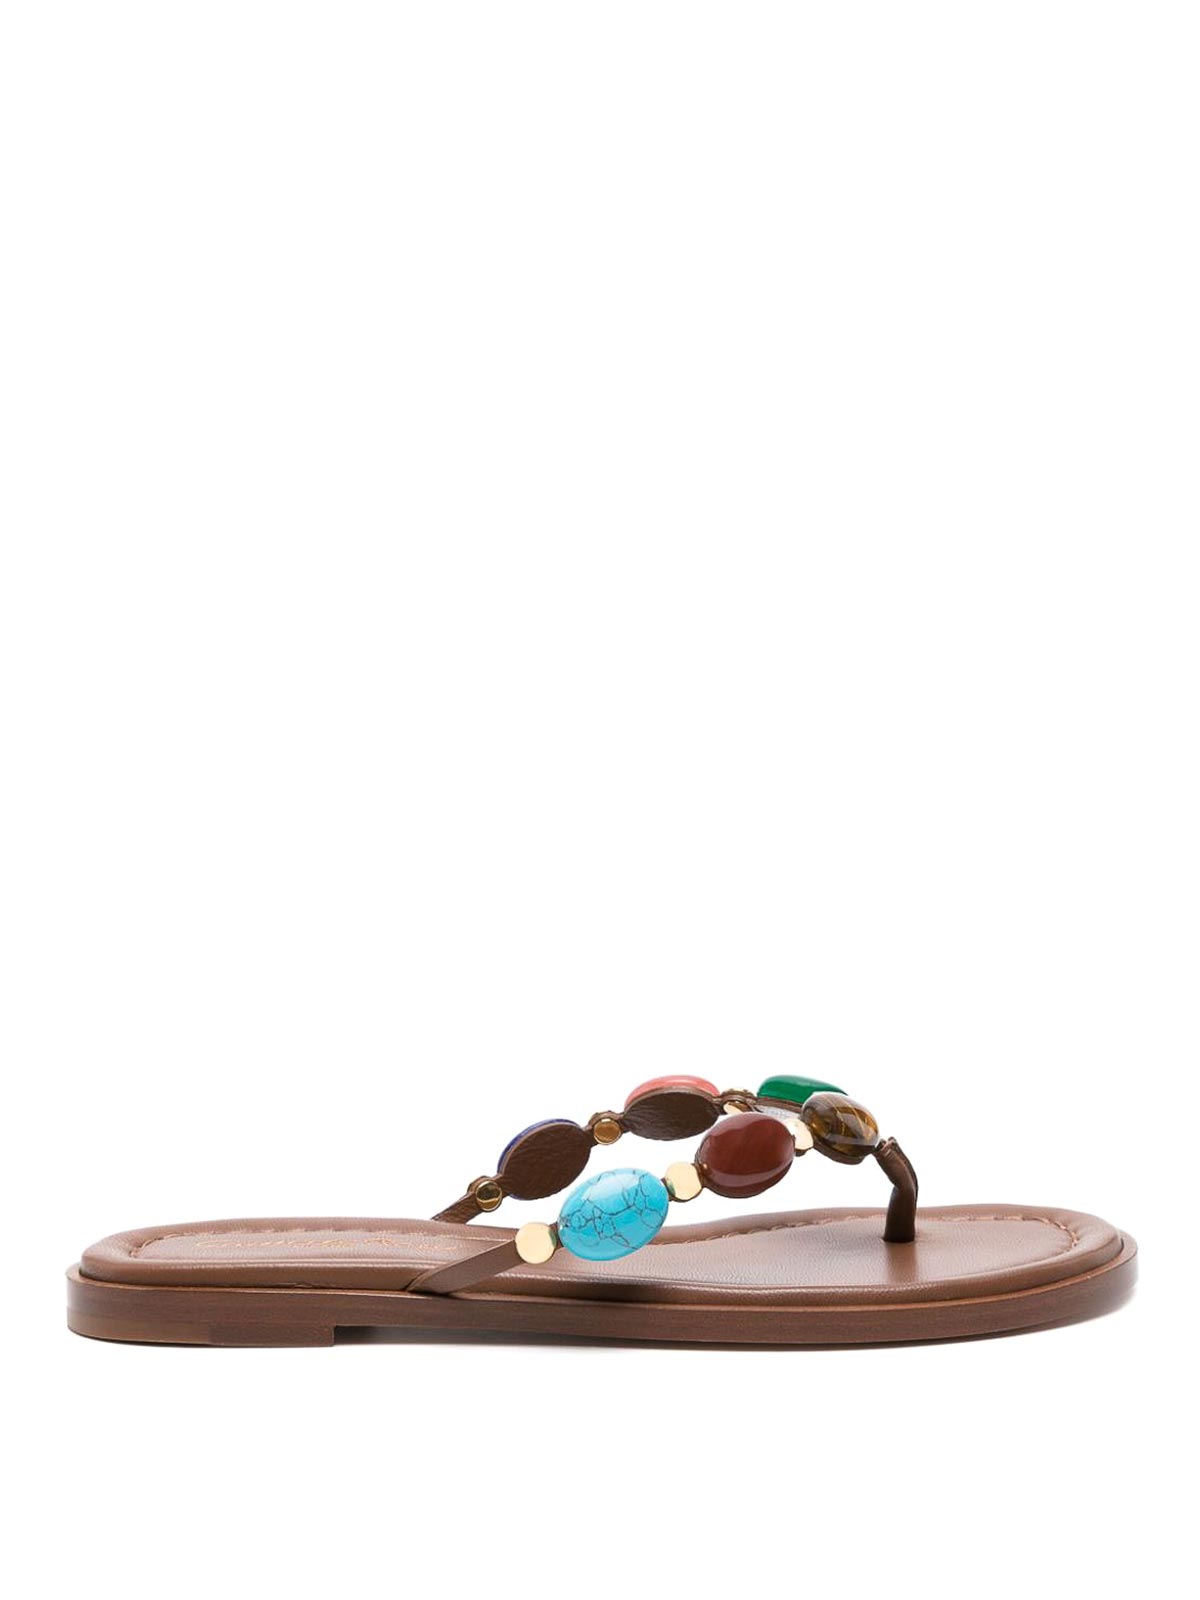 Gianvito Rossi Shanti Leather Thong Sandals In Marrón